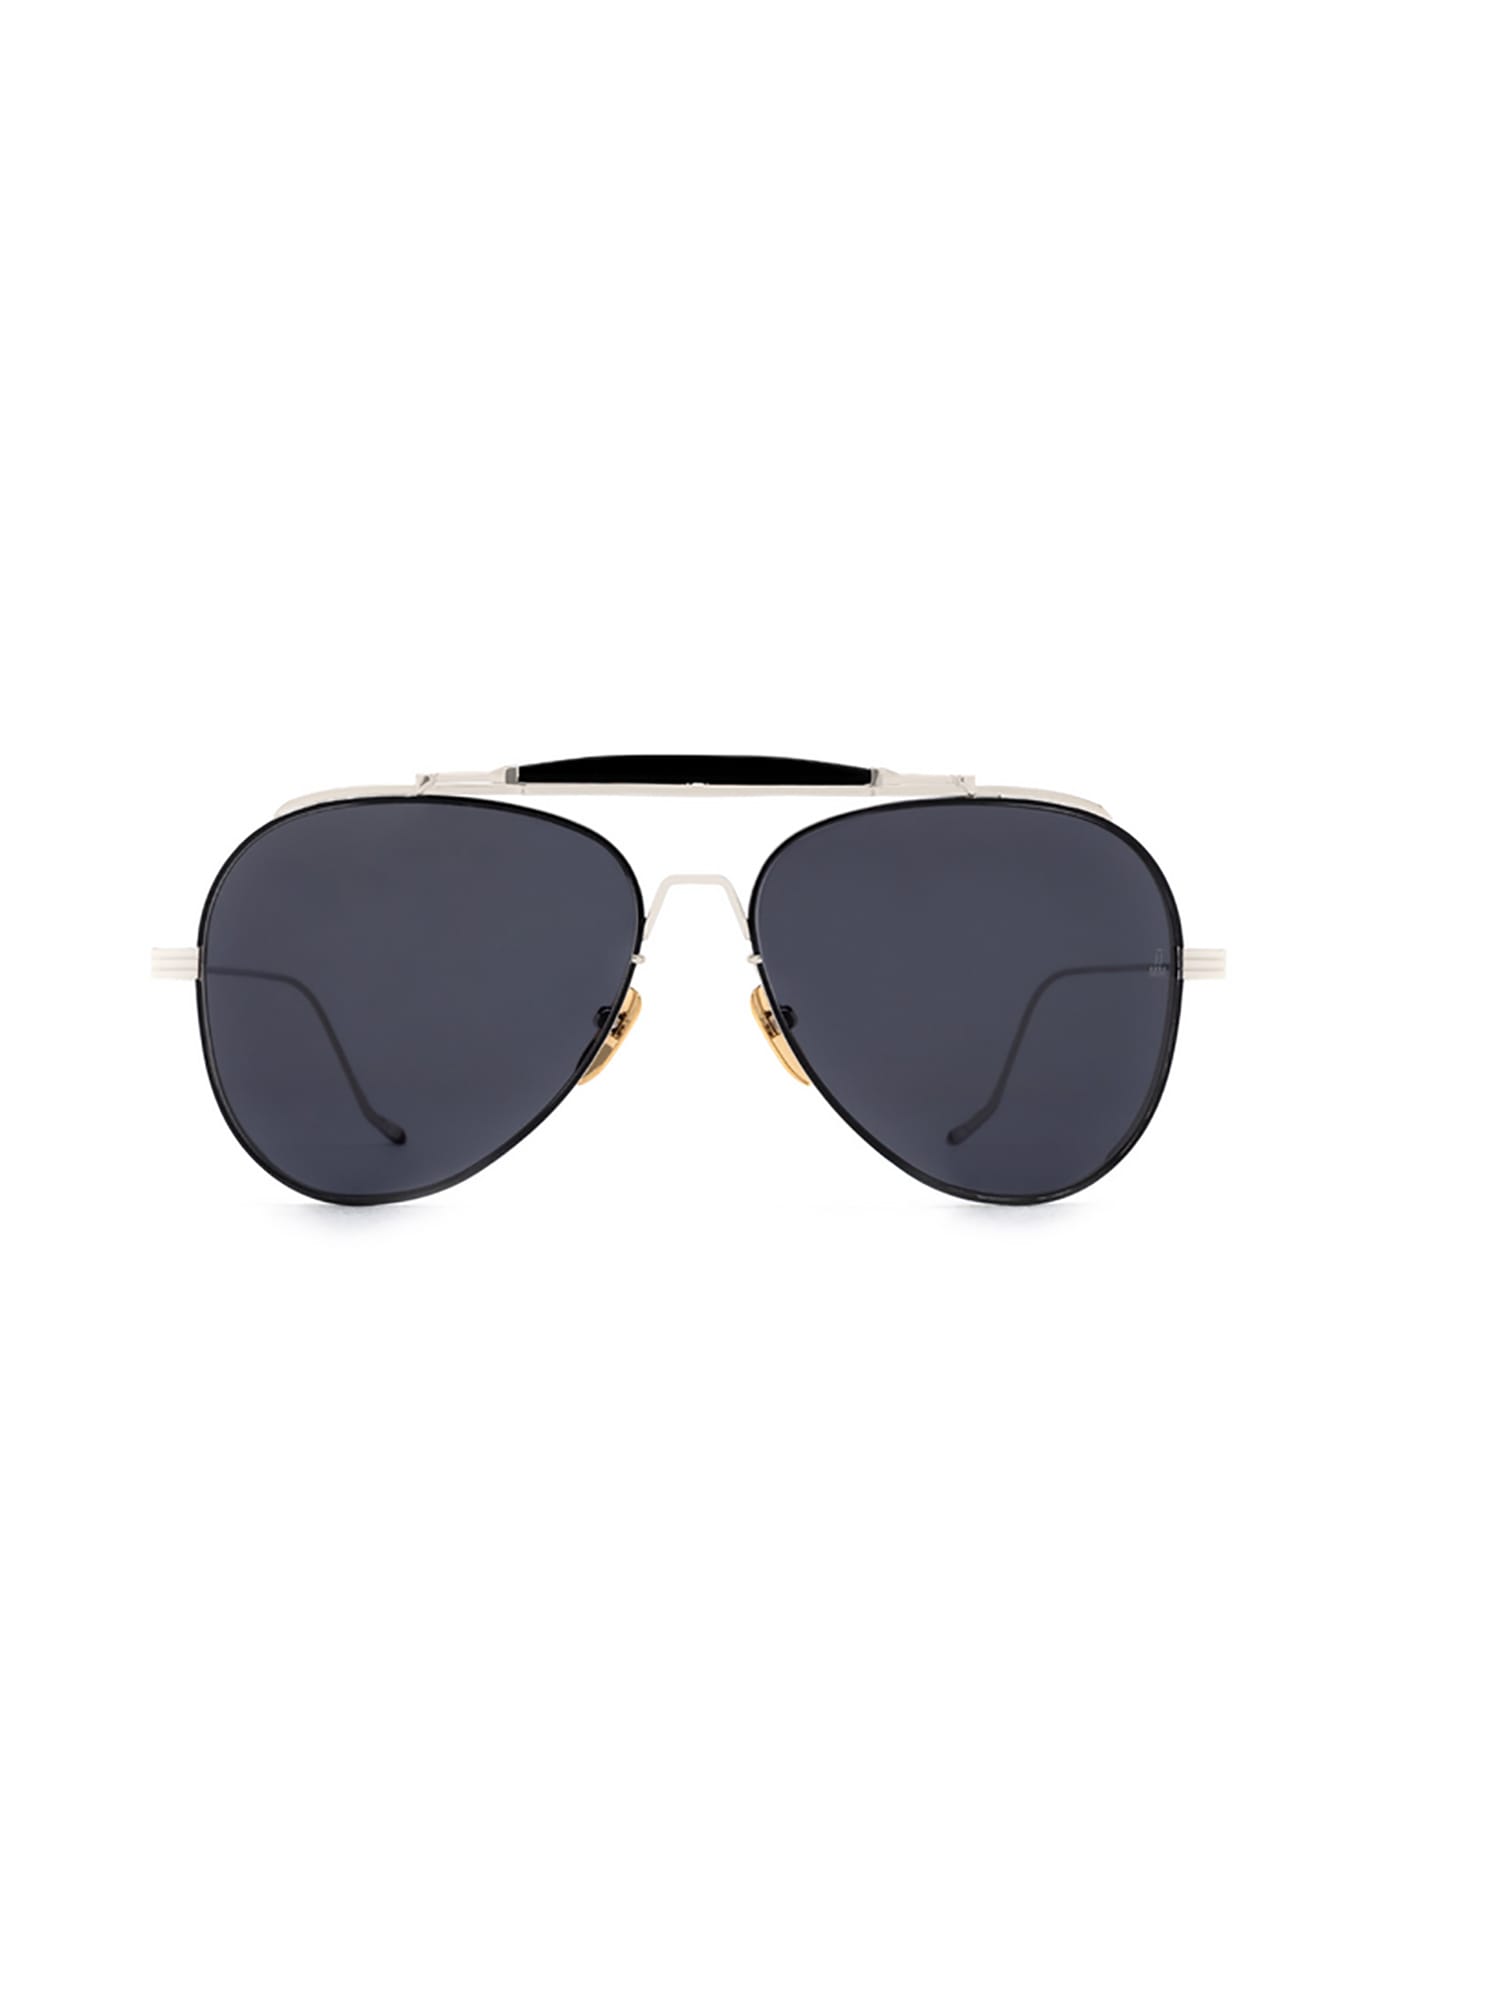 jacques marie mage gonzo peyote 2 sunglasses